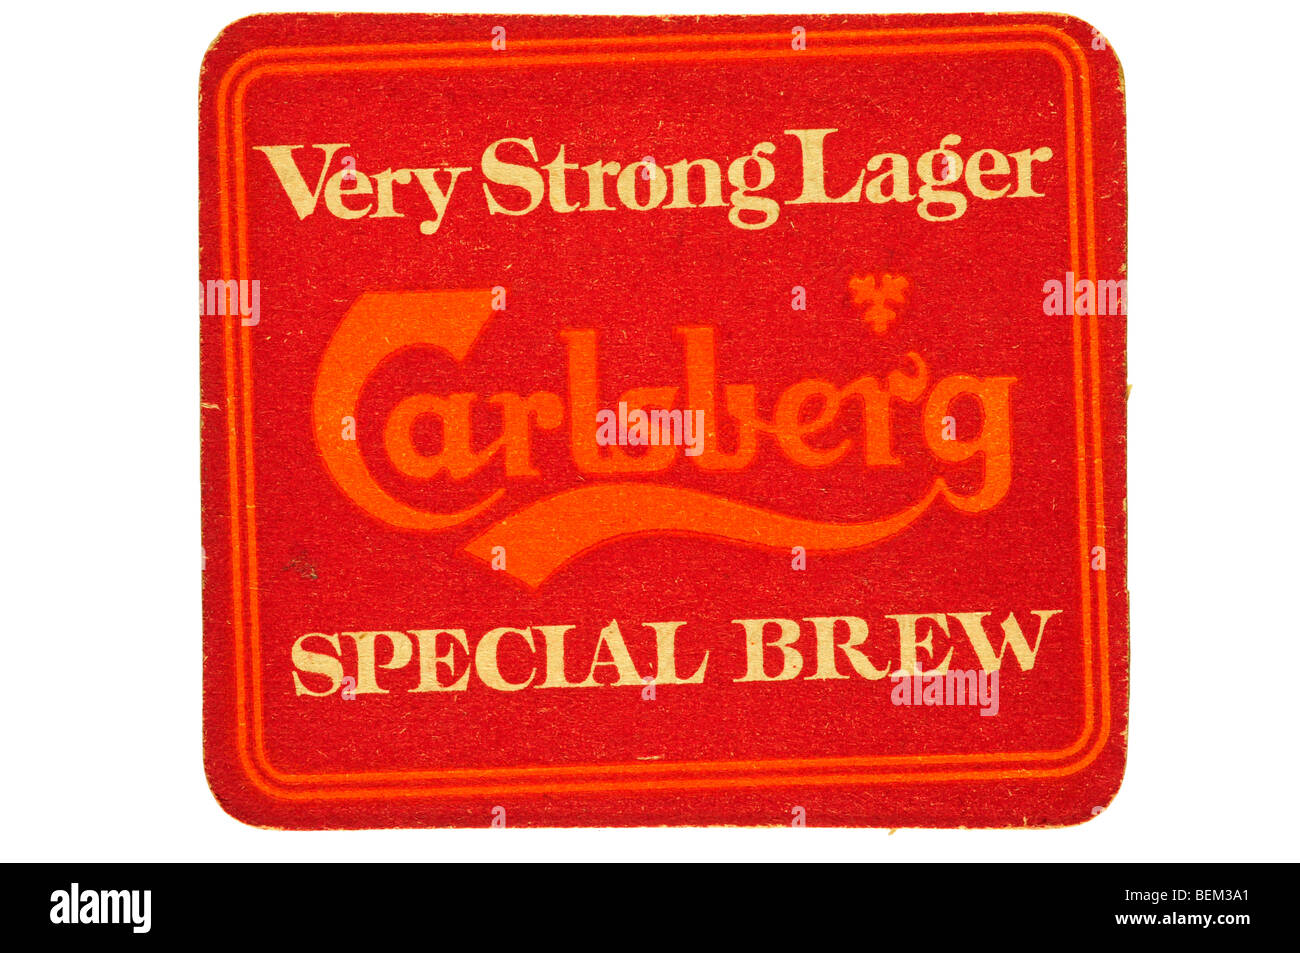 very strong lager carlsberg special brew Stock Photo